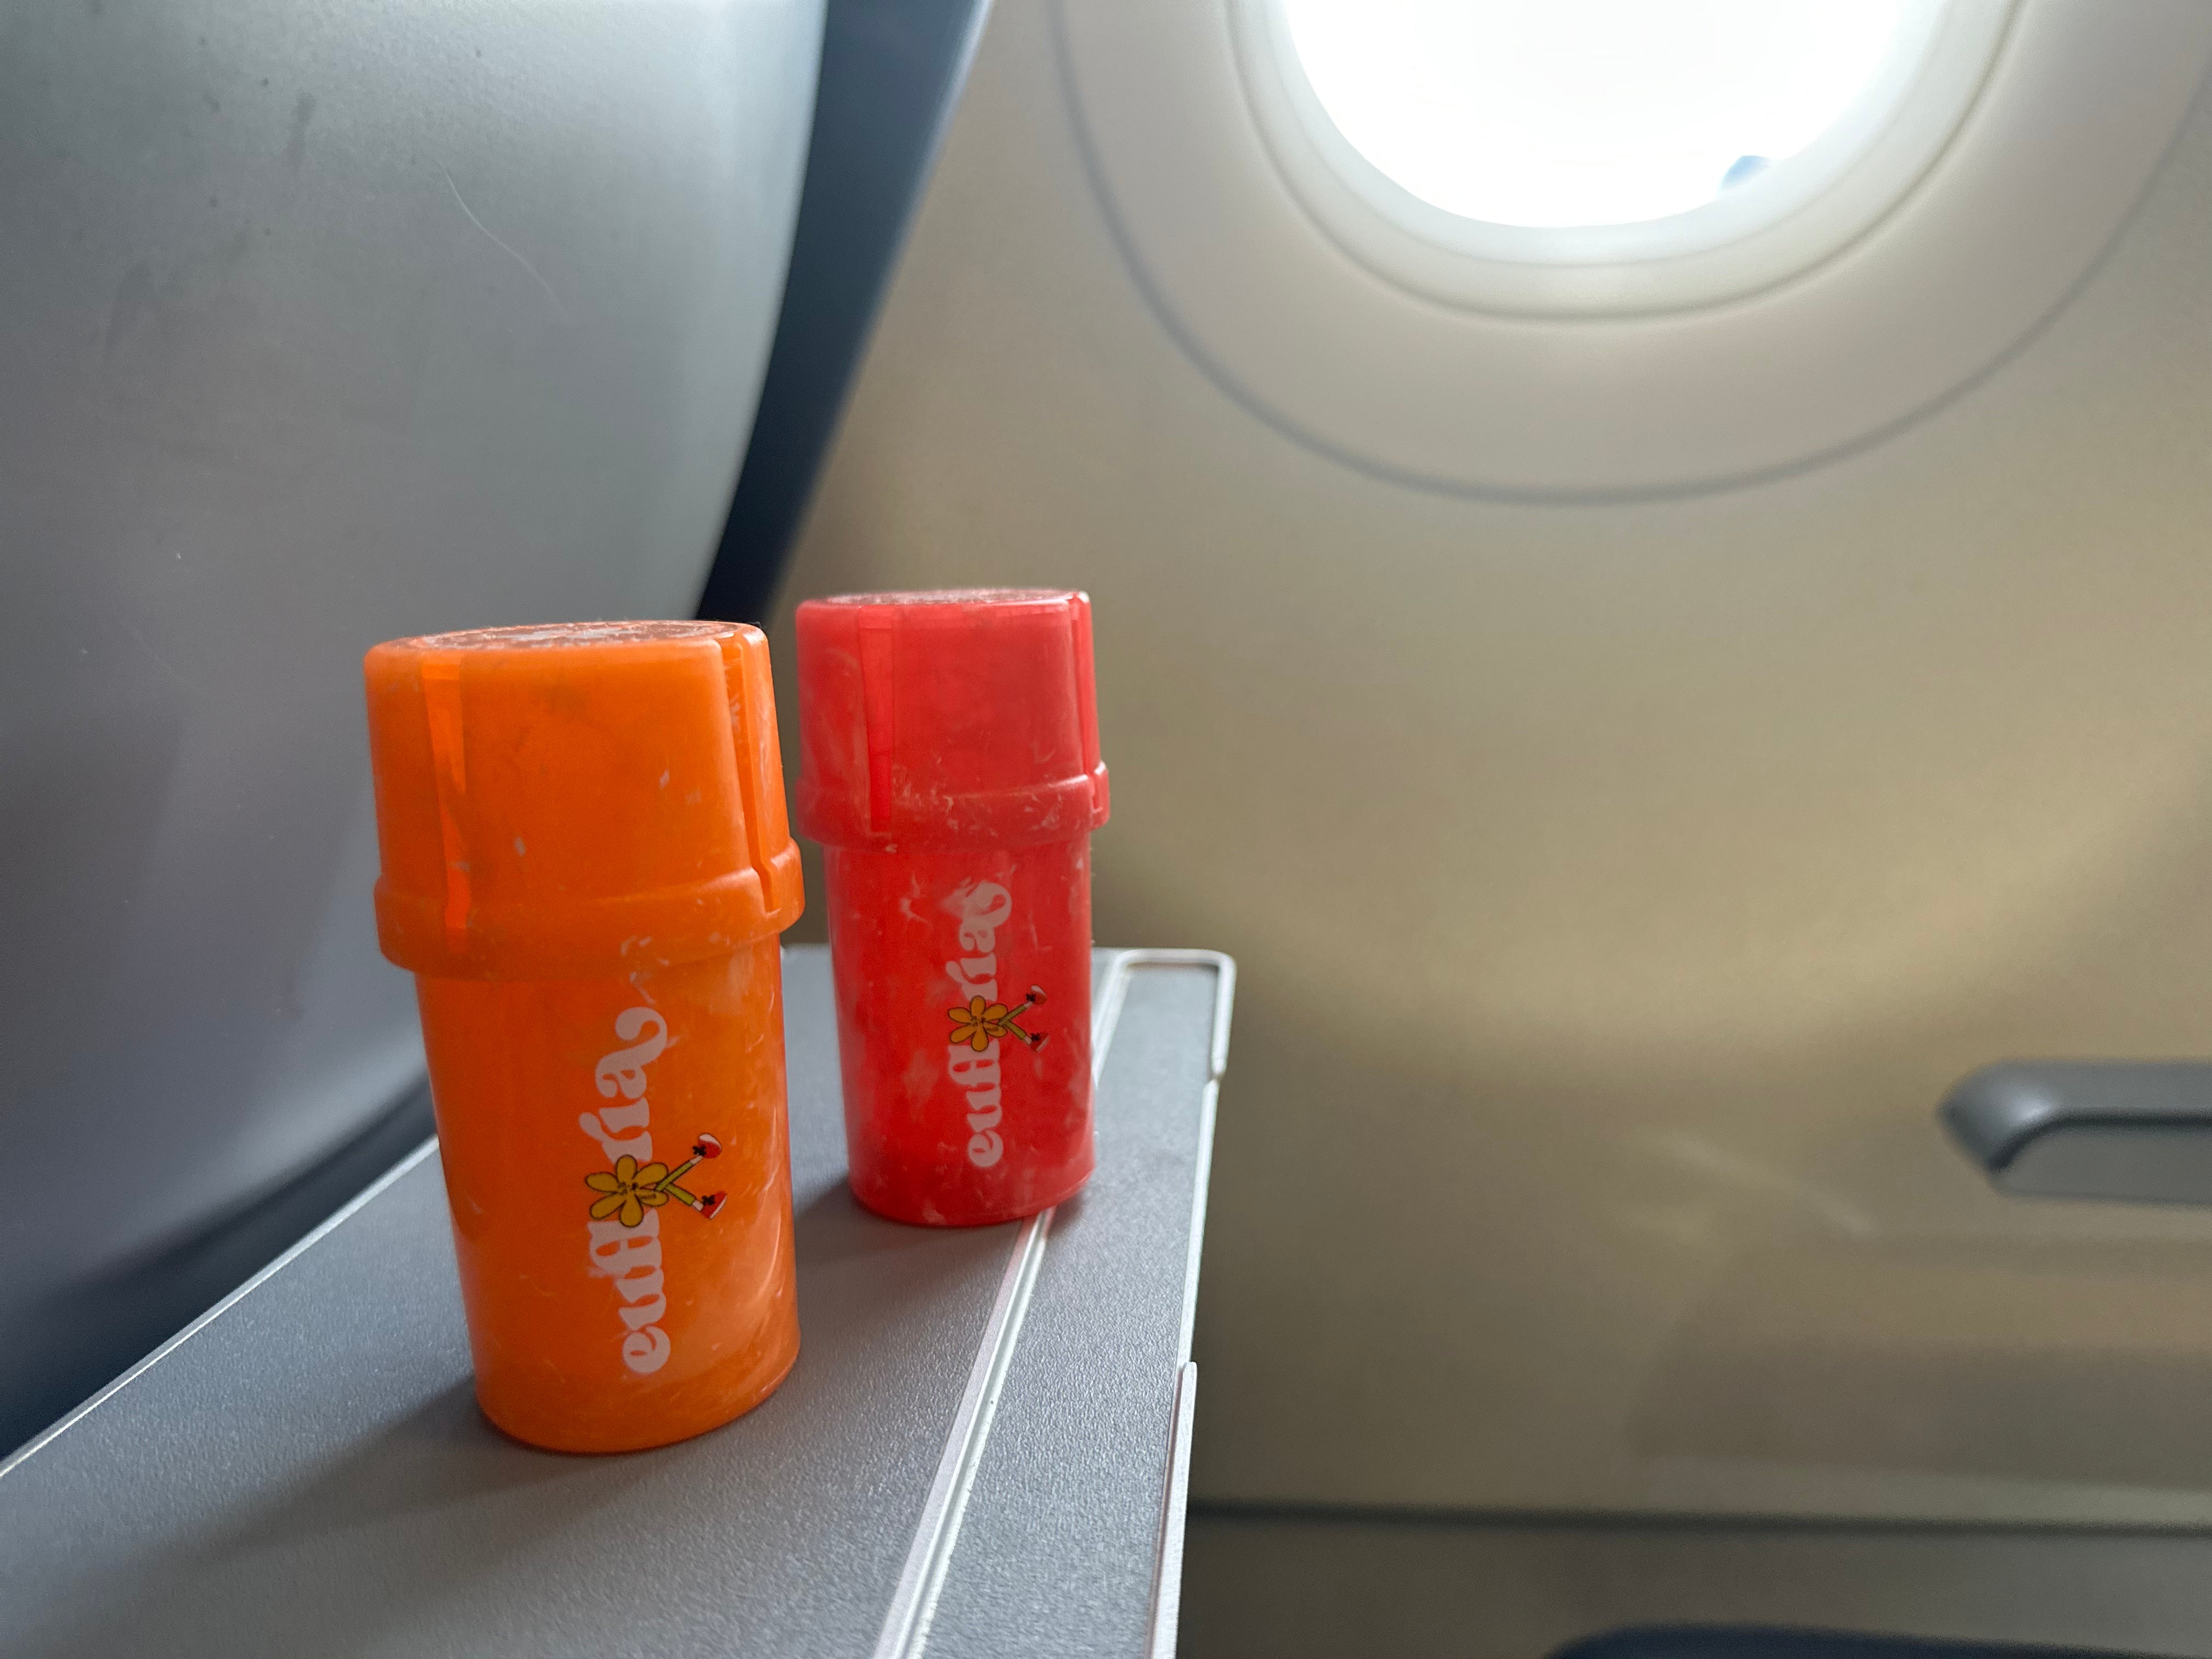 medtainers on a plane